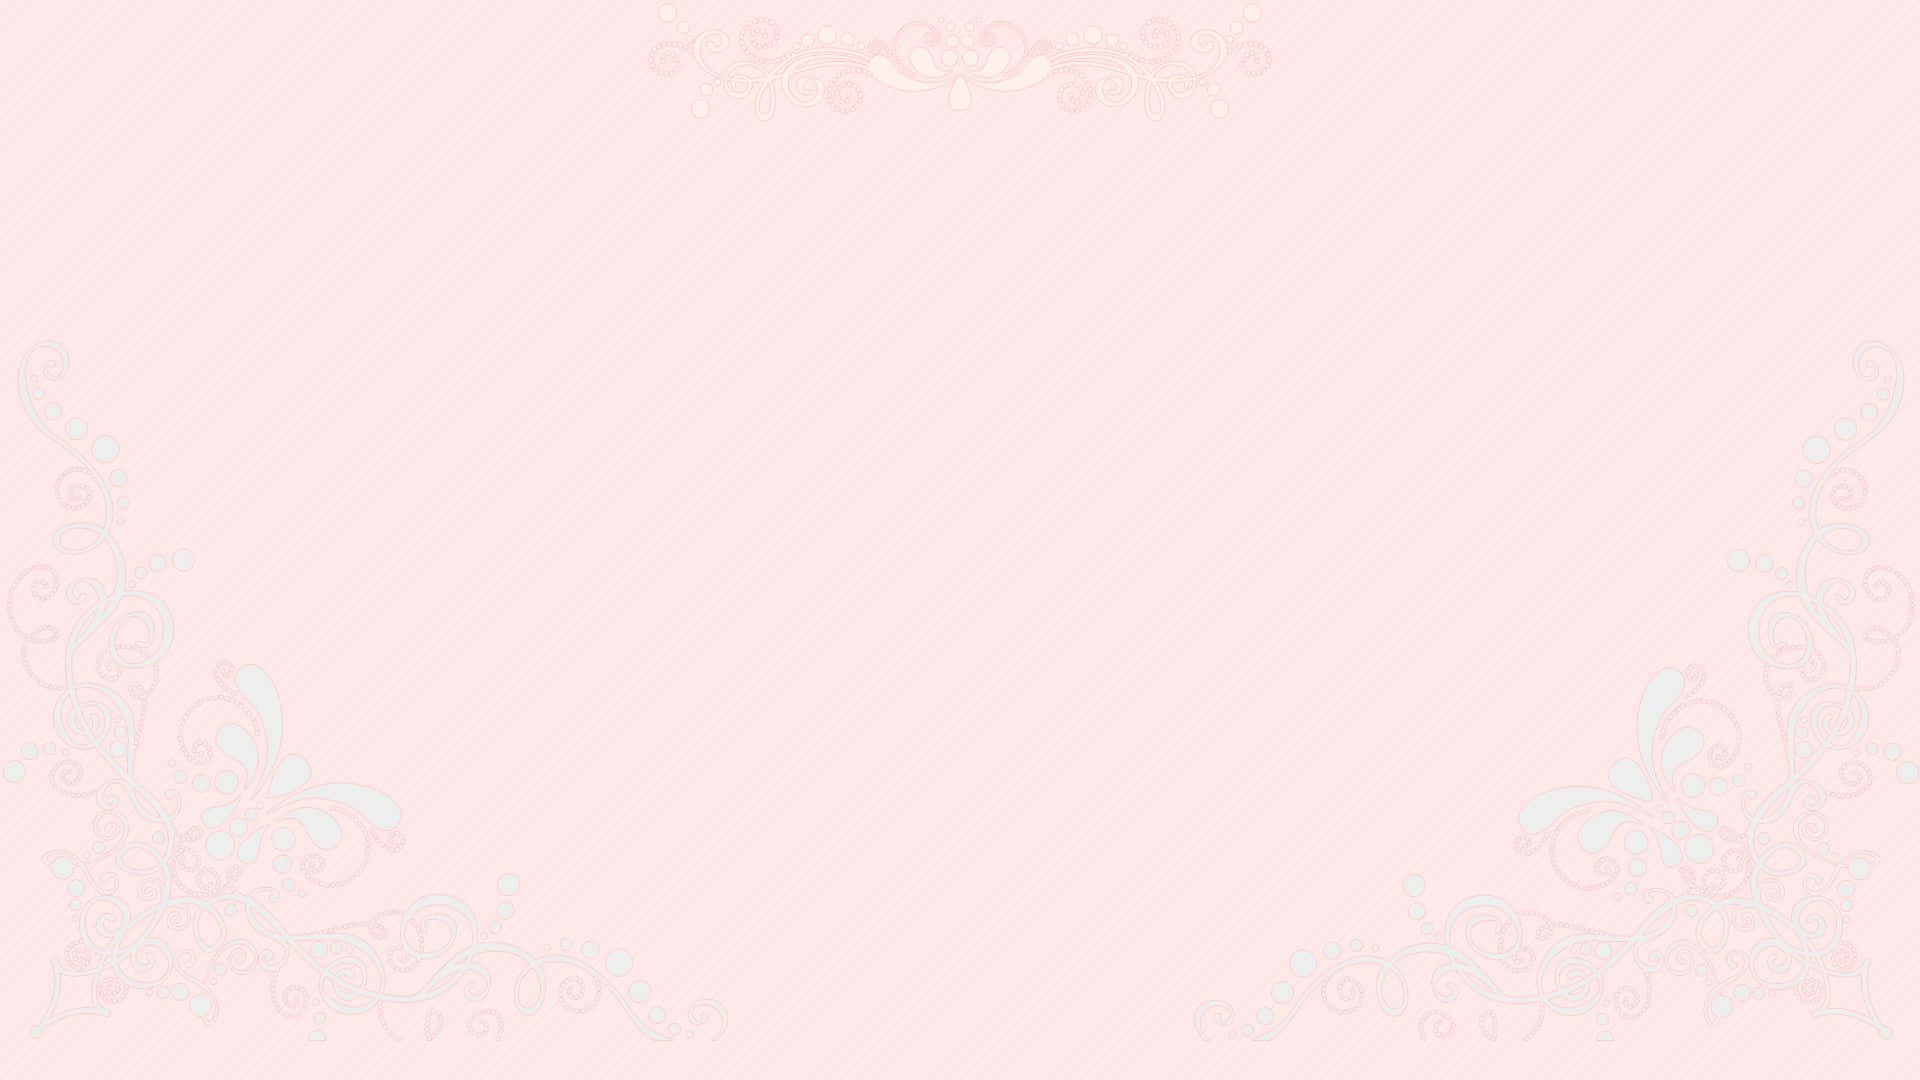 Download Plain And Solid Light Pink Background